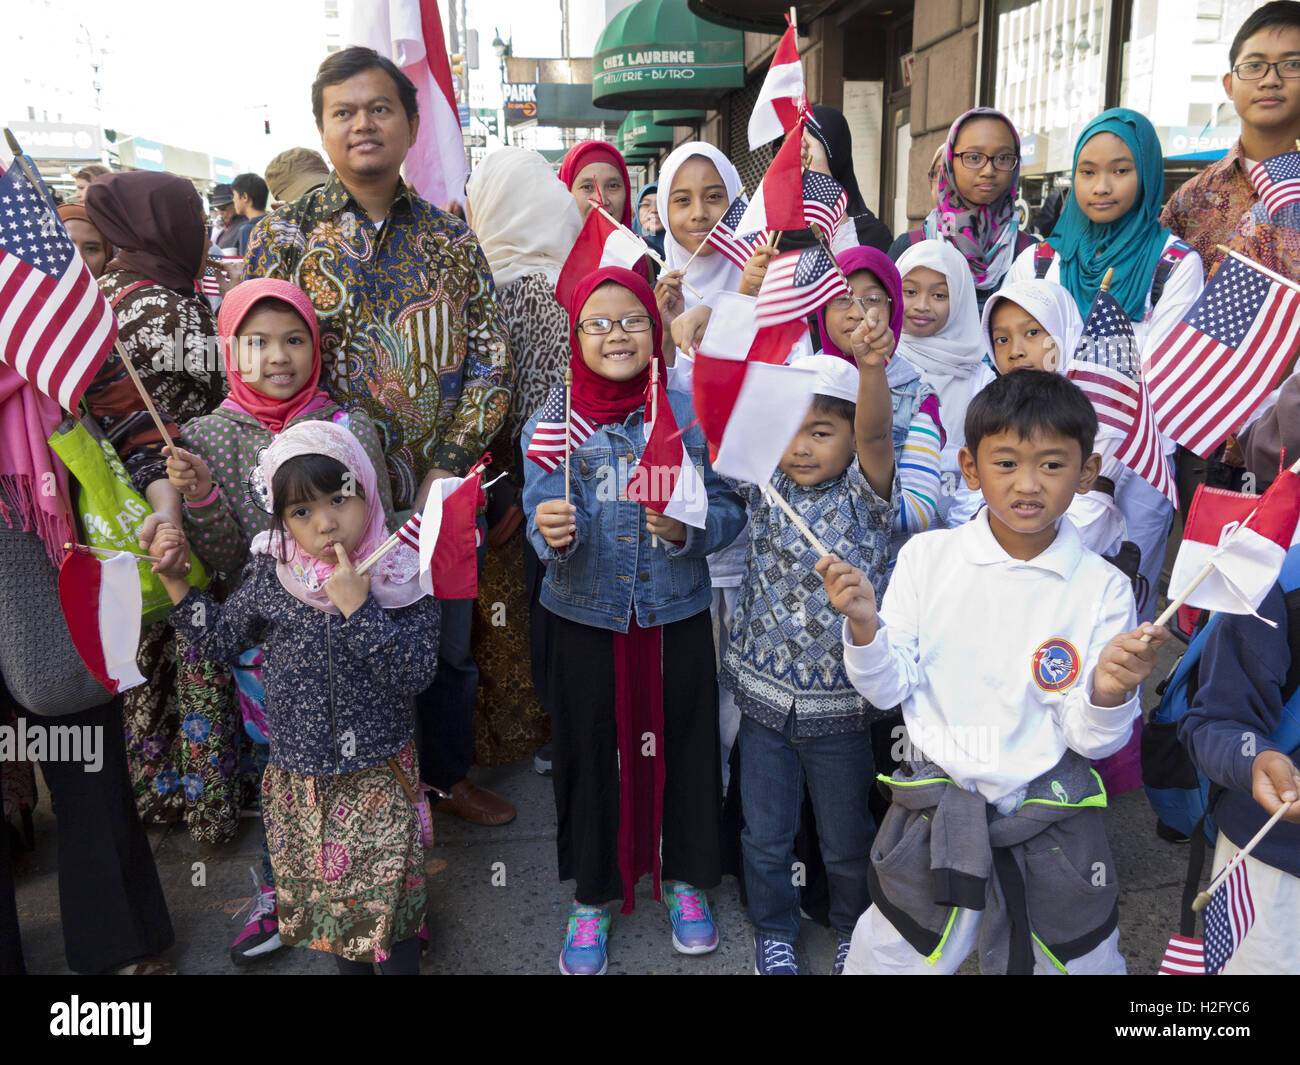 indonesian-american-children-at-american-muslim-day-parade-in-new-H2FYC6.jpg